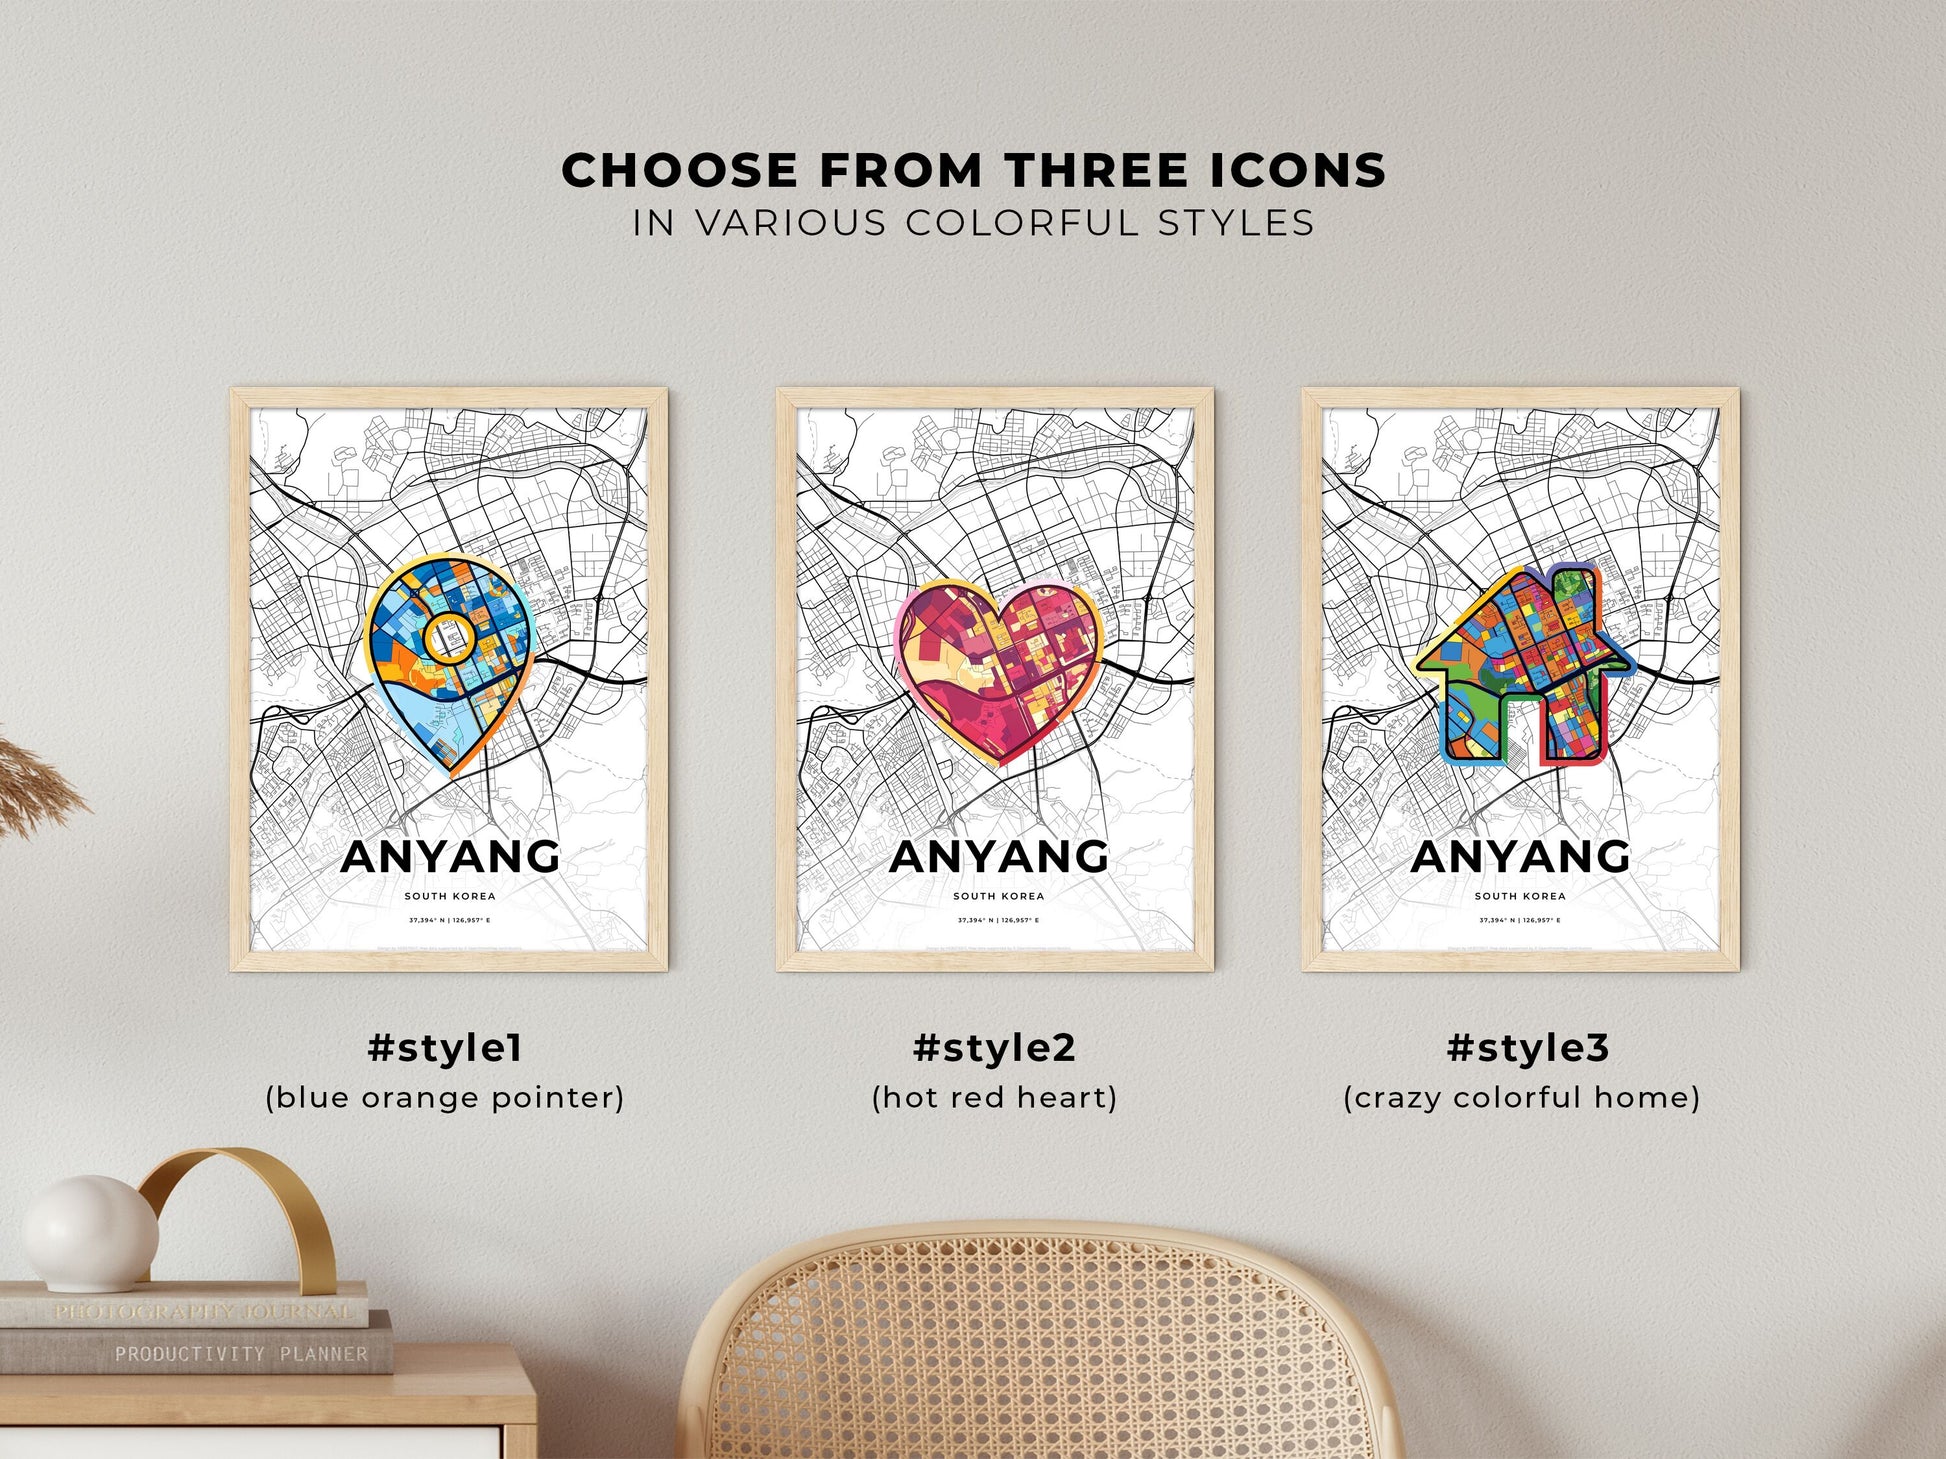 ANYANG SOUTH KOREA minimal art map with a colorful icon. Where it all began, Couple map gift.